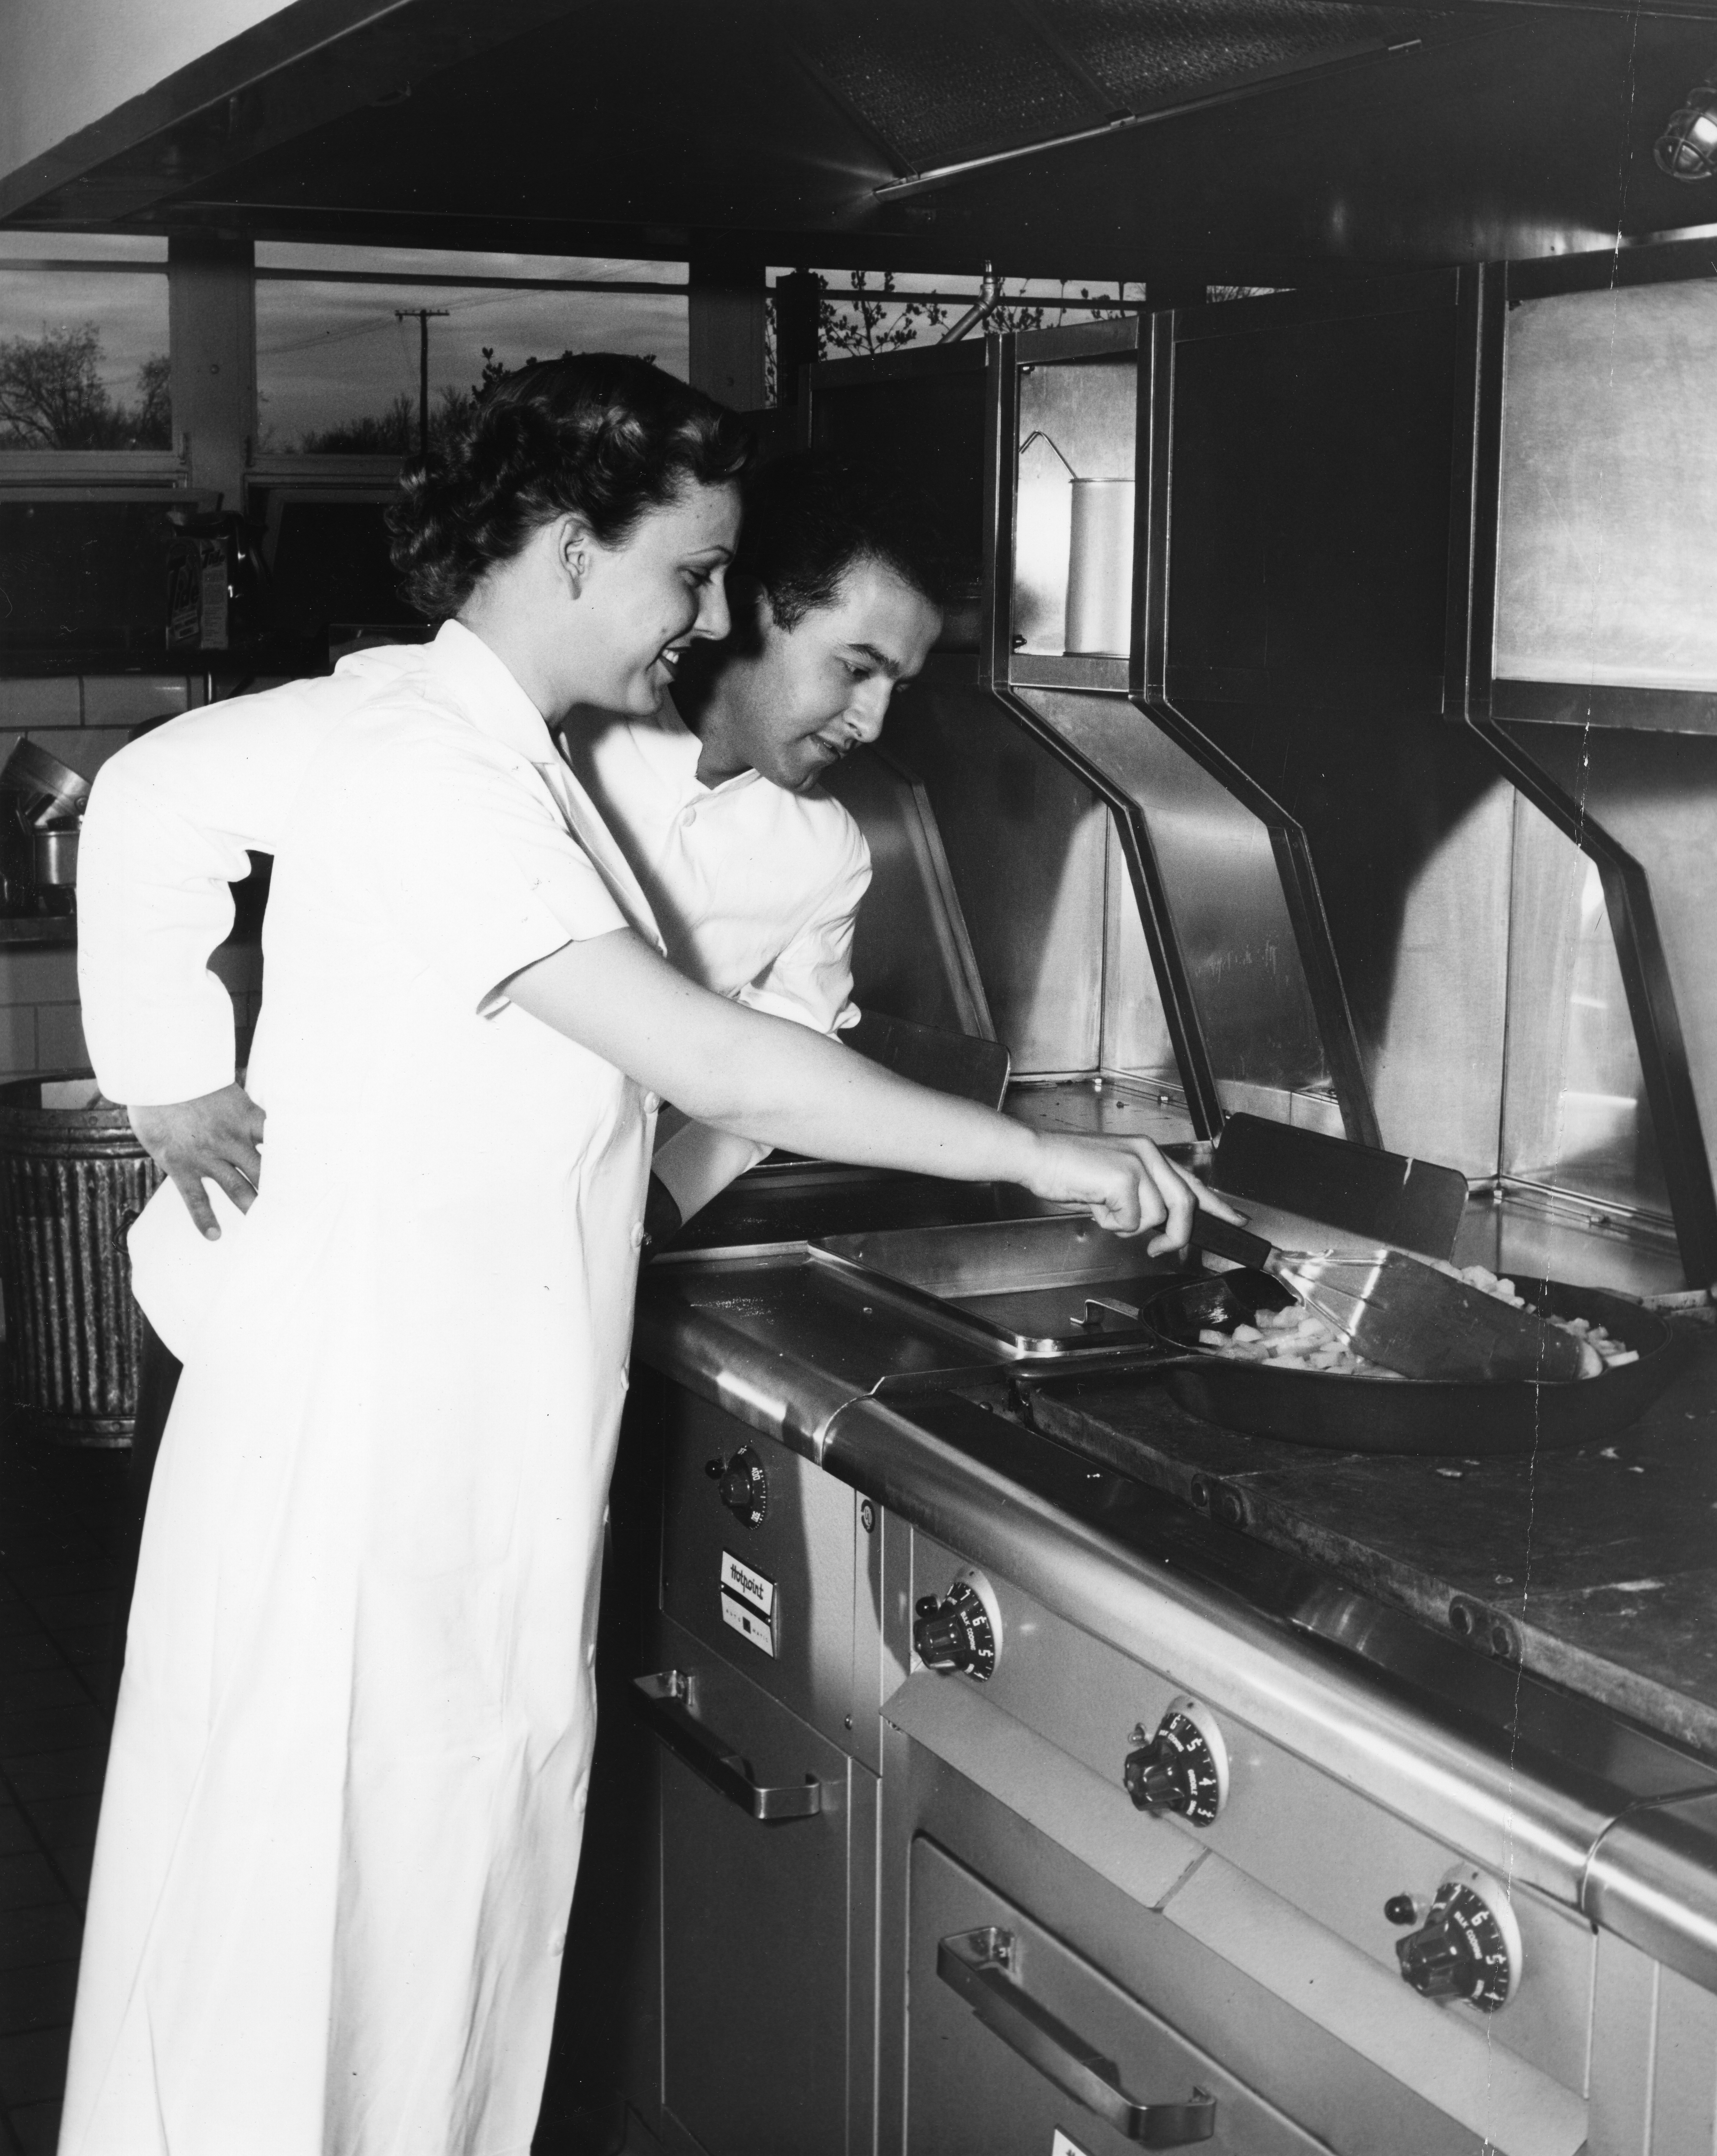 Cooking in the kitchen of the Kellogg Center, 1952